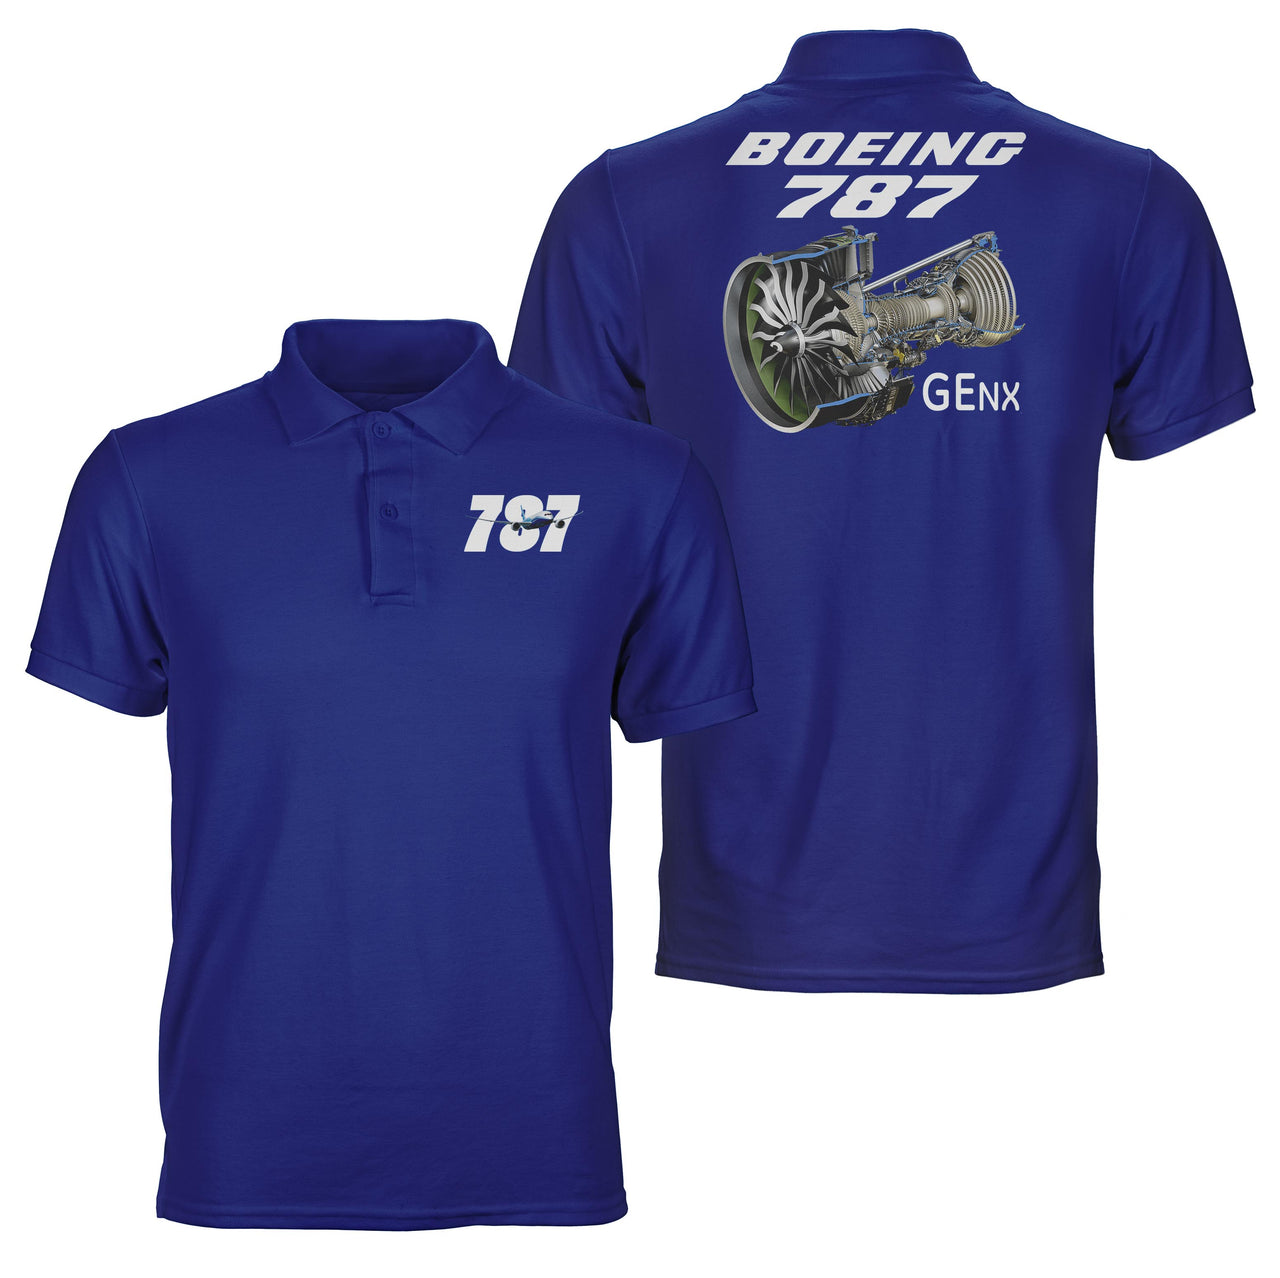 Boeing 787 & GENX Engine Designed Double Side Polo T-Shirts